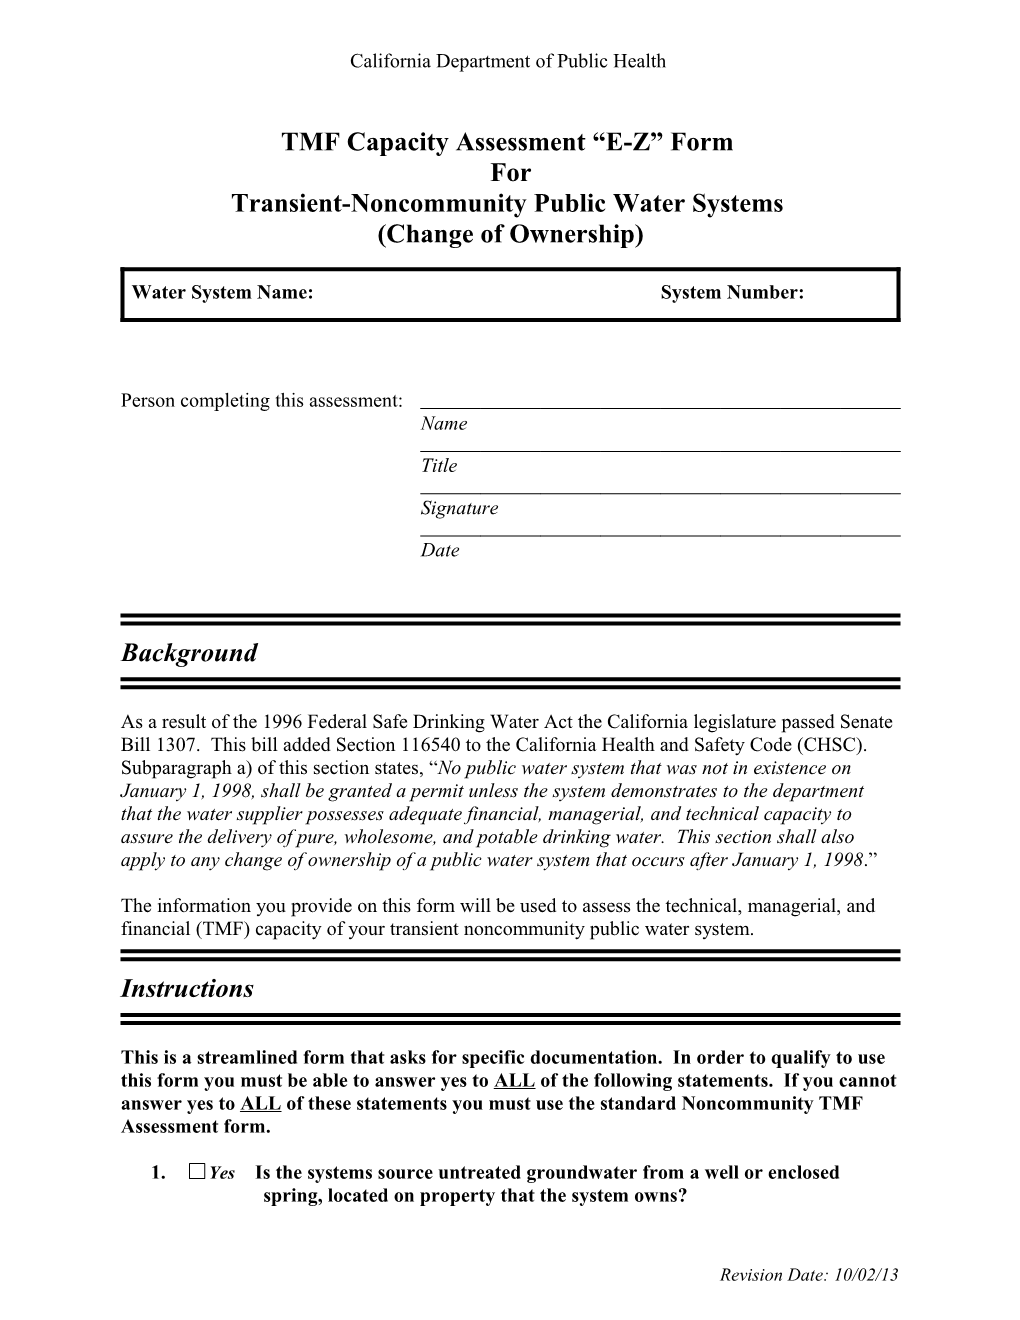 TMF Capacity Assessment Form